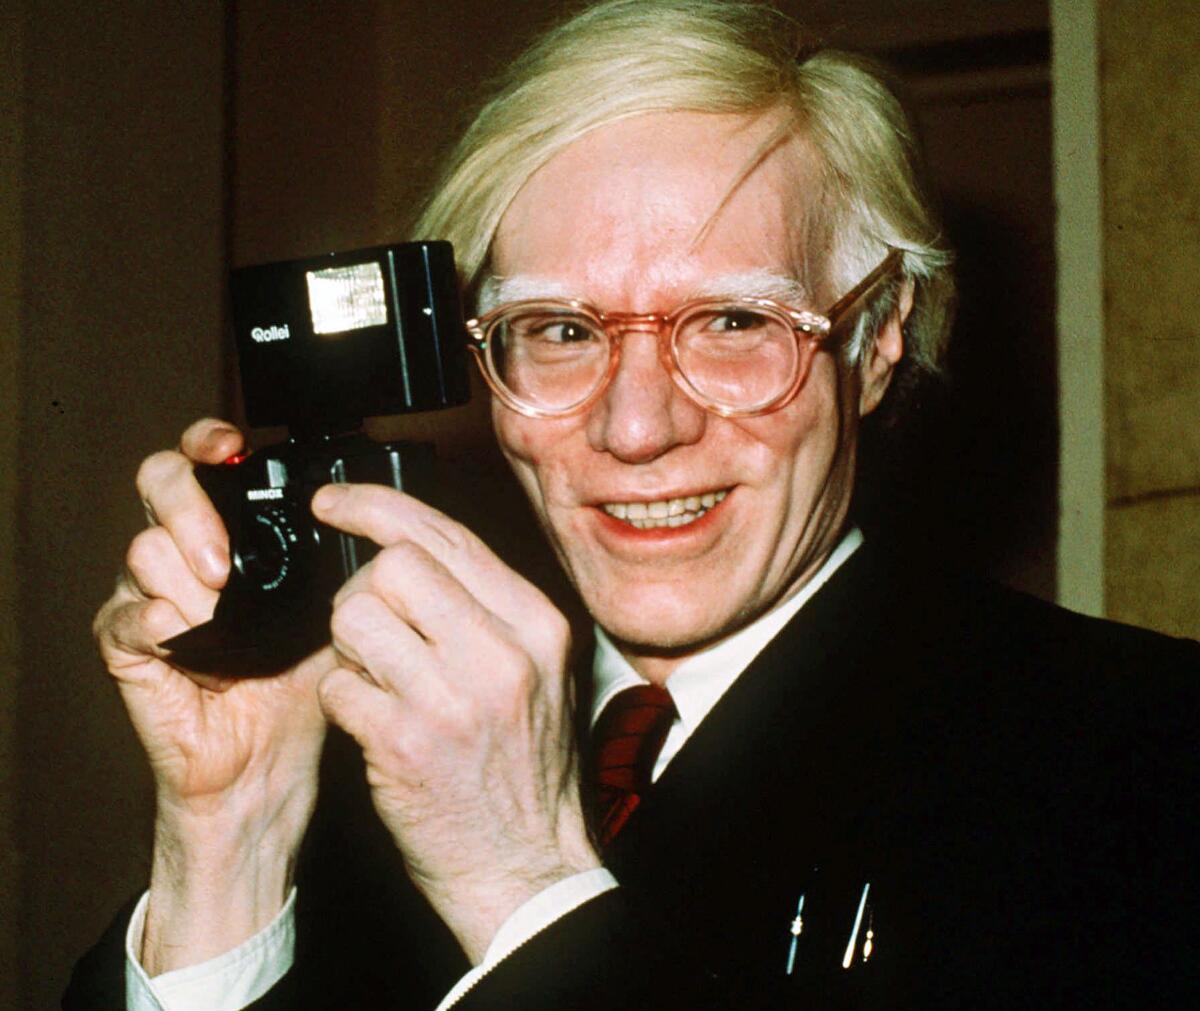 A vintage photo from 1976 shows Andy Warhol smiling brightly and holding a camera. 